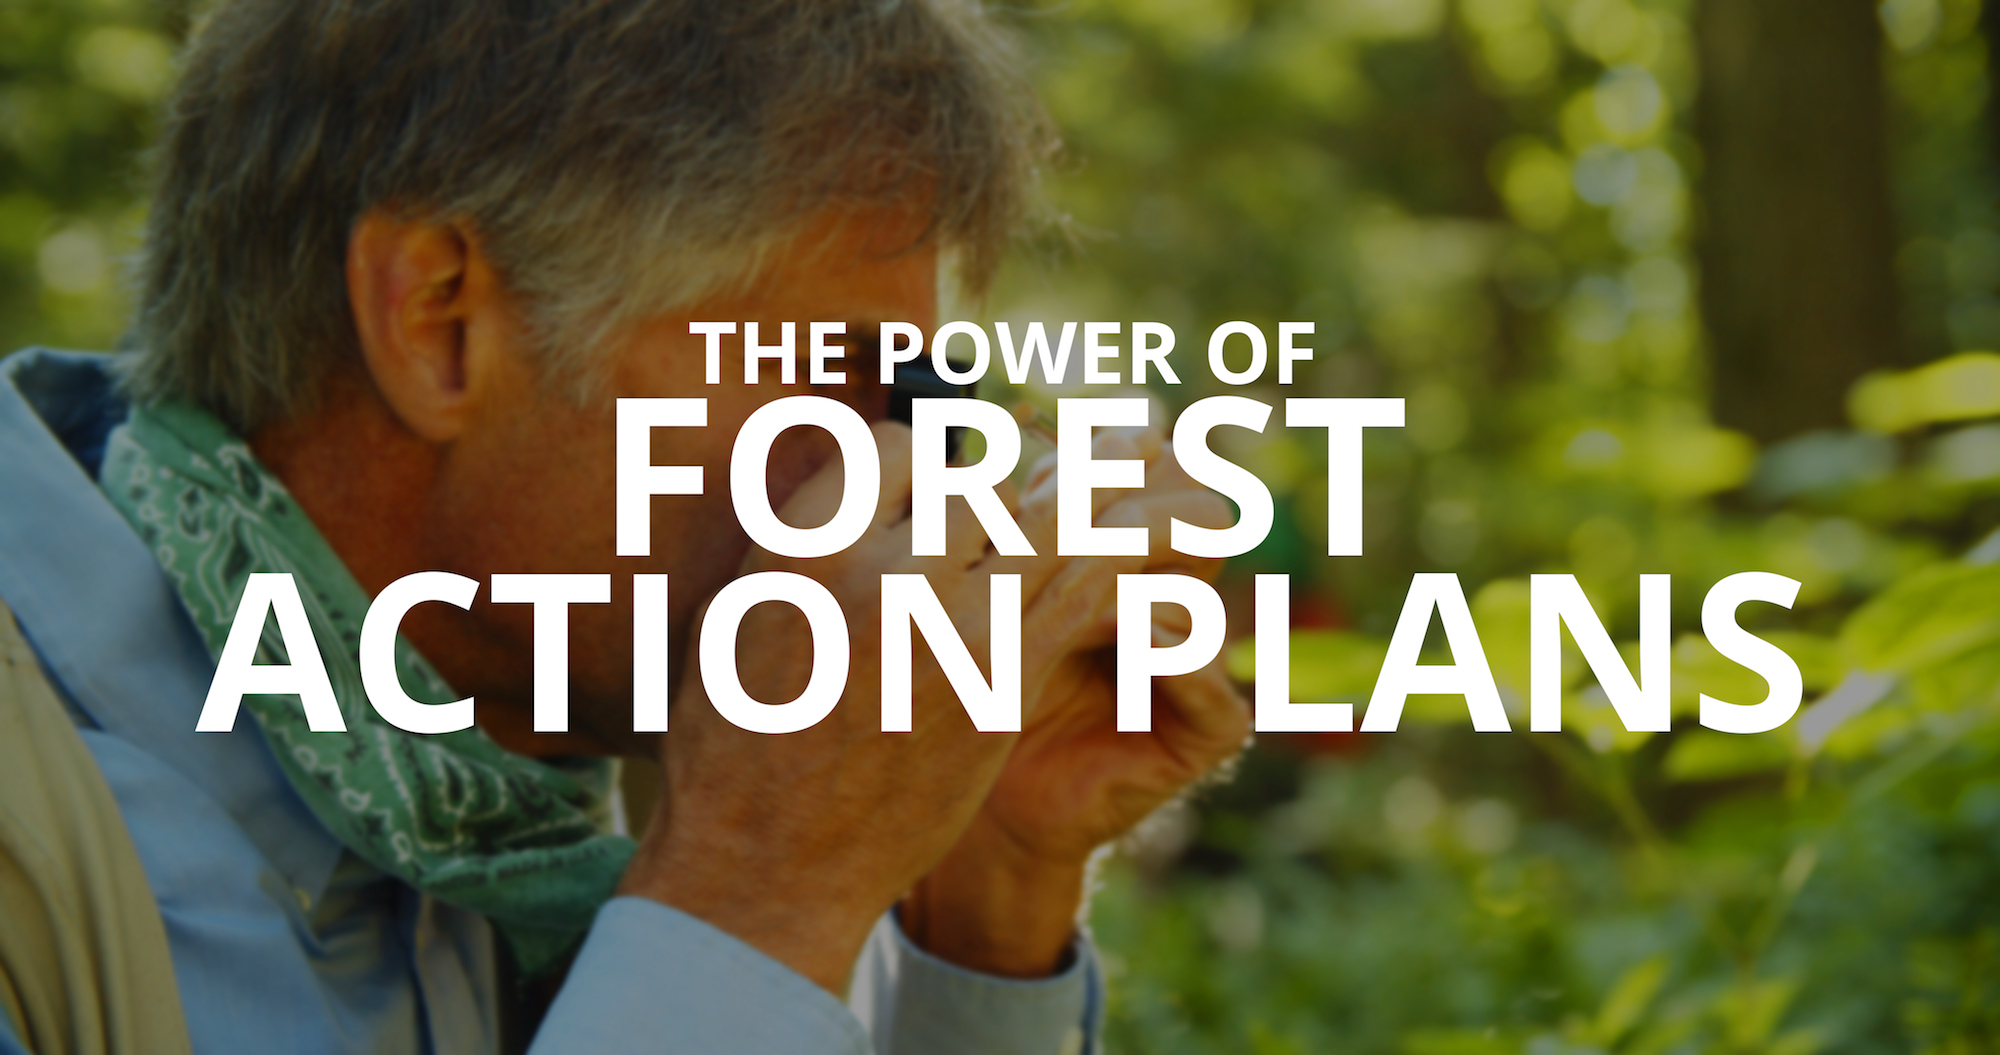 Text "The power of Forest Action Plans" over a picture of a professional forester